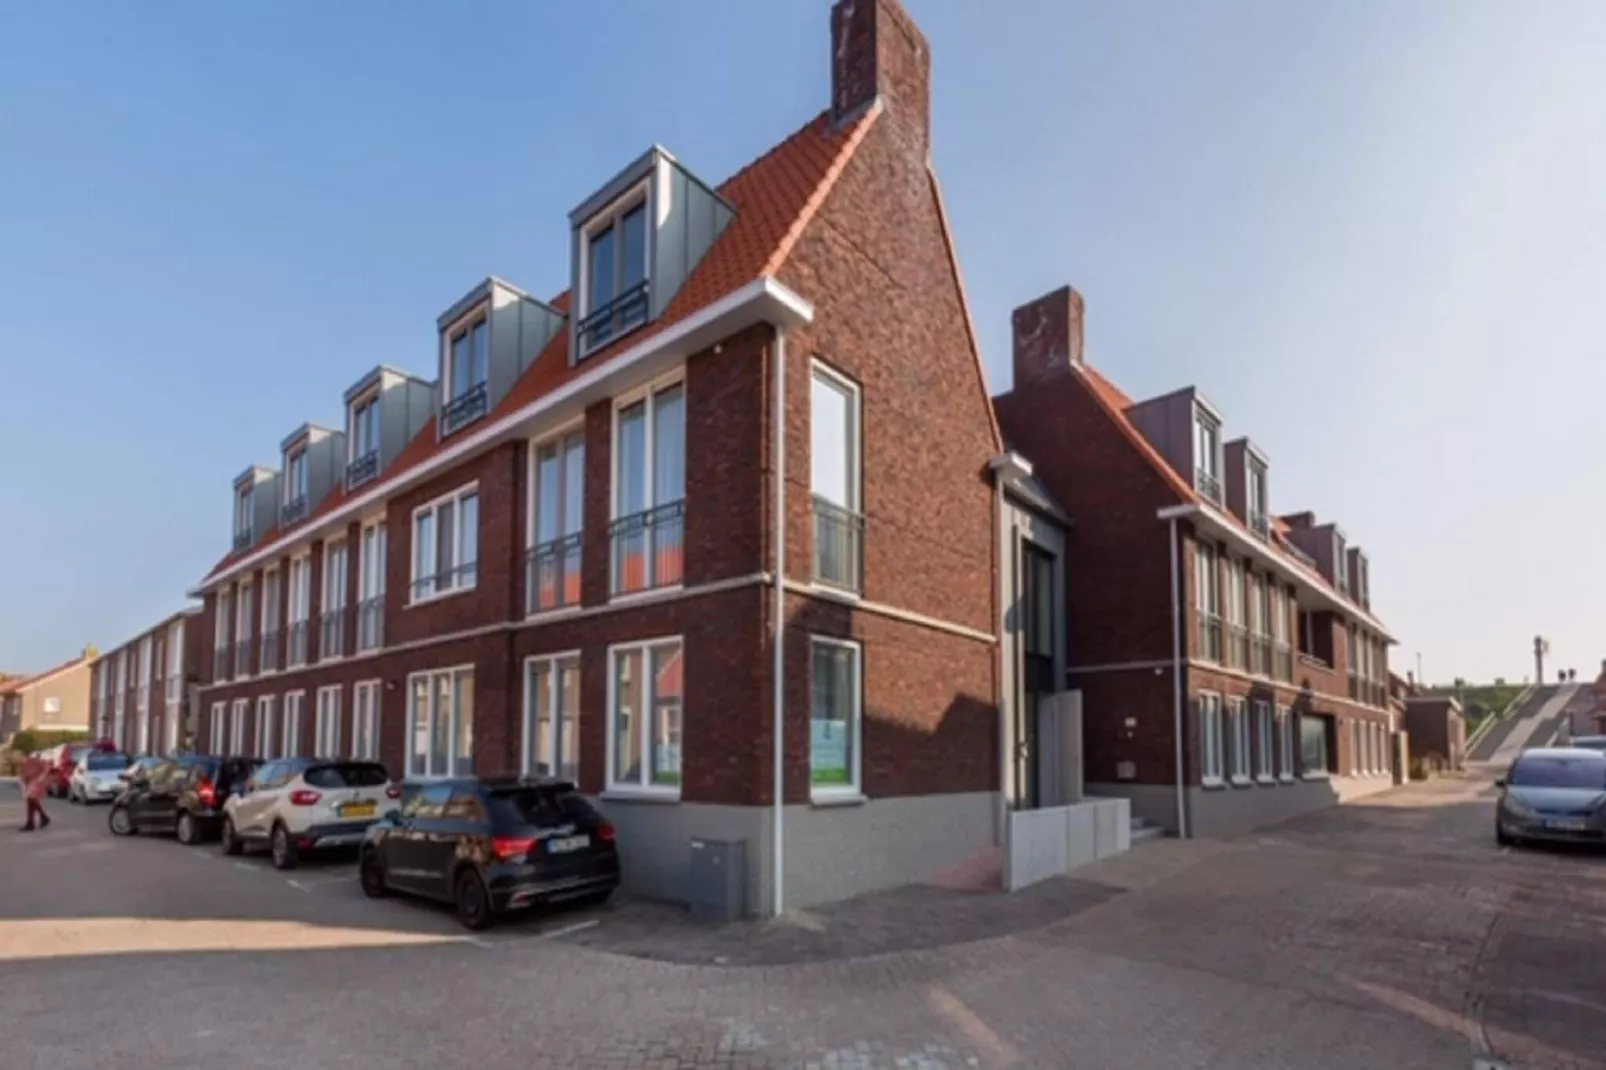 Aparthotel Zoutelande - Luxe 2-persoons comfort appartement-Buitenkant zomer